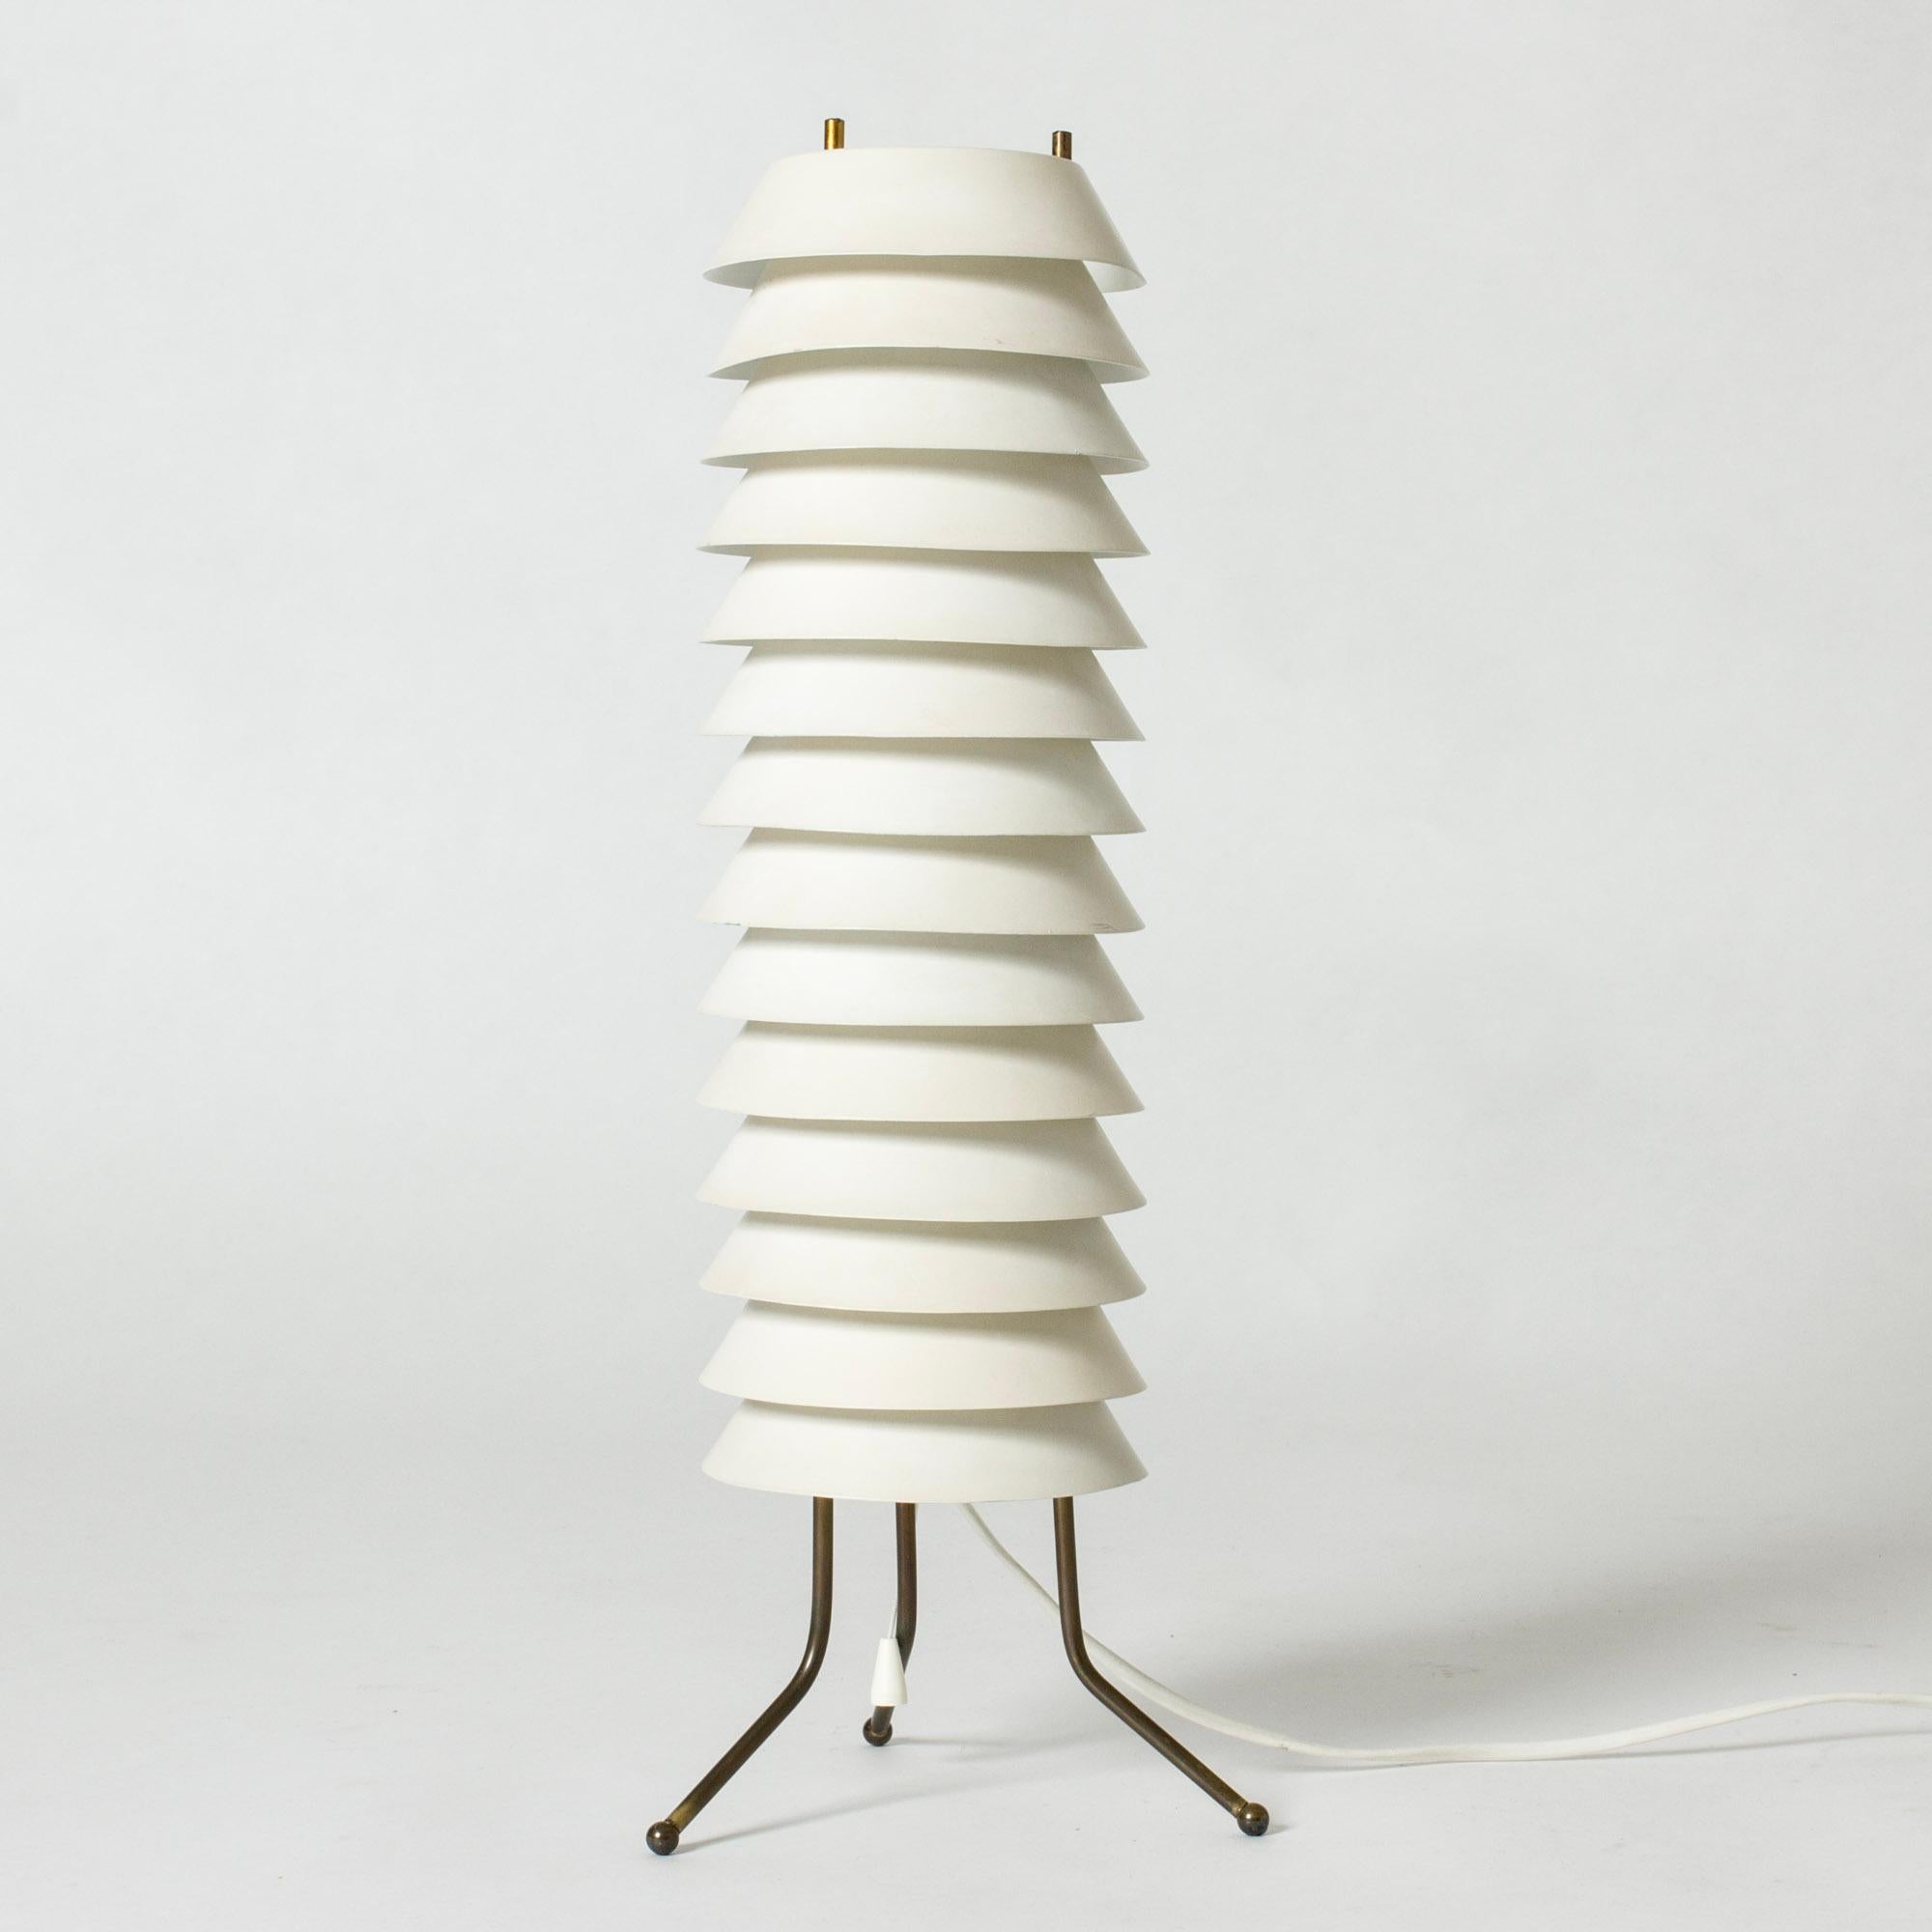 Striking “Maija Mehiläinen” (“Maija the Bee”) table lamp by Ilmari Tapiovaara. Stacked white lacquered lamellas in a tall cylinder form let out a soft light.